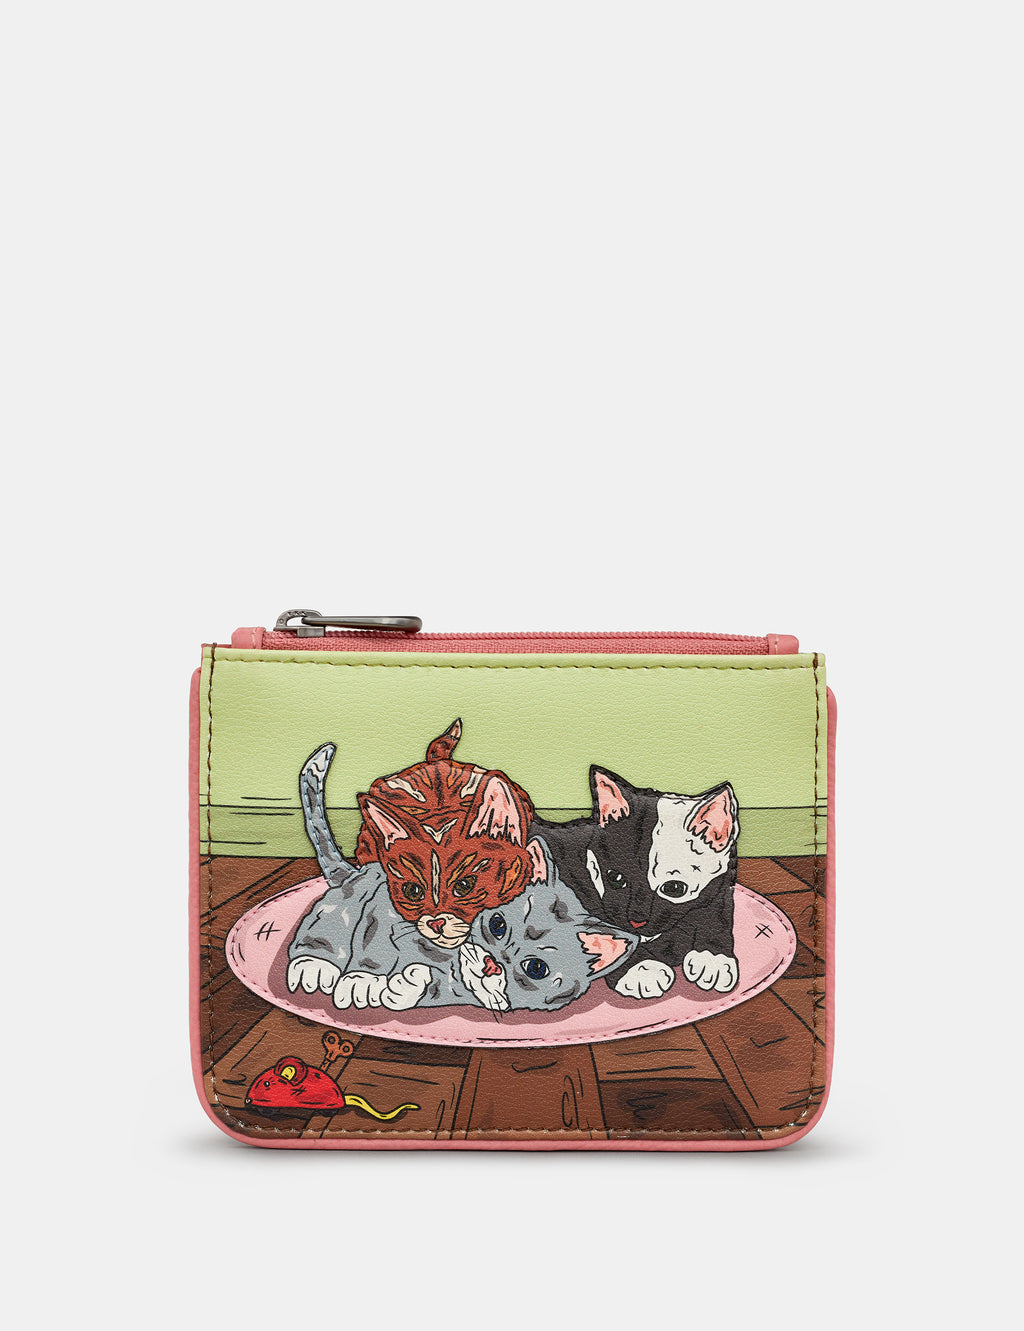 Playtime Kittens Zip Top Leather Purse